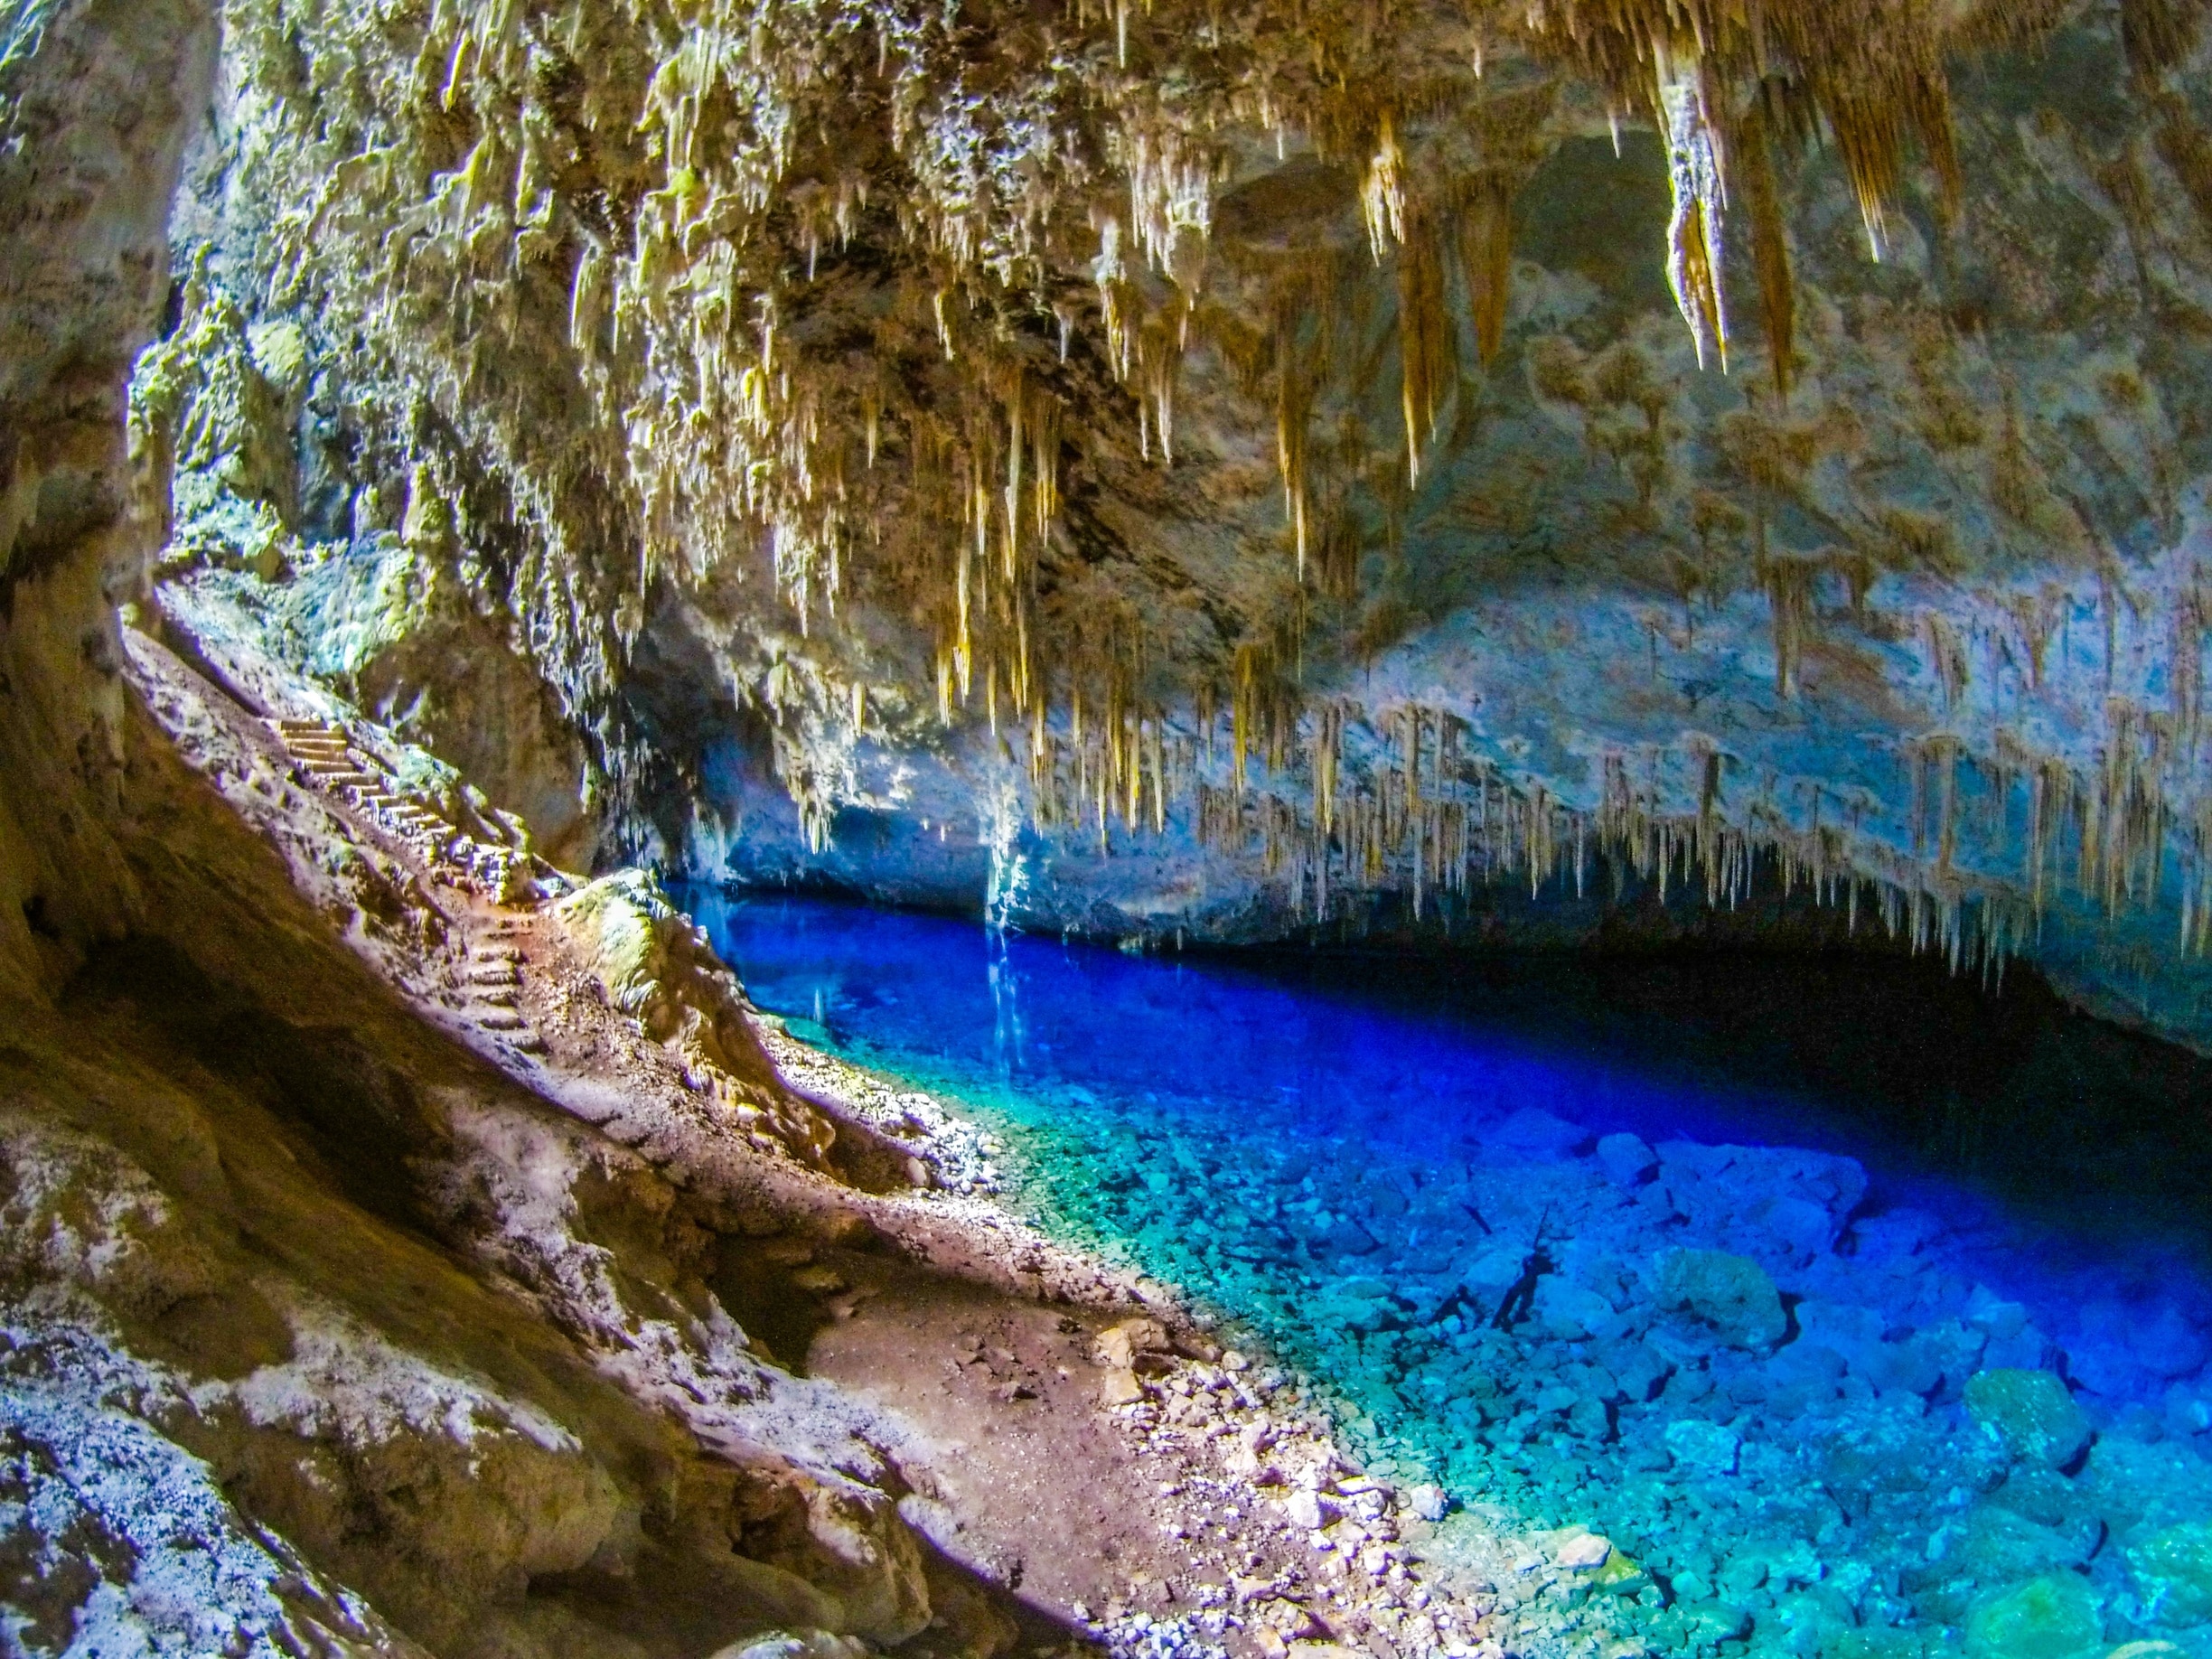 Gruta do Lago Azul, not far away from Bonito, Brazil. The magnesium in the water makes the sediments fall to the bottom, which again makes the blue water crystal clear.